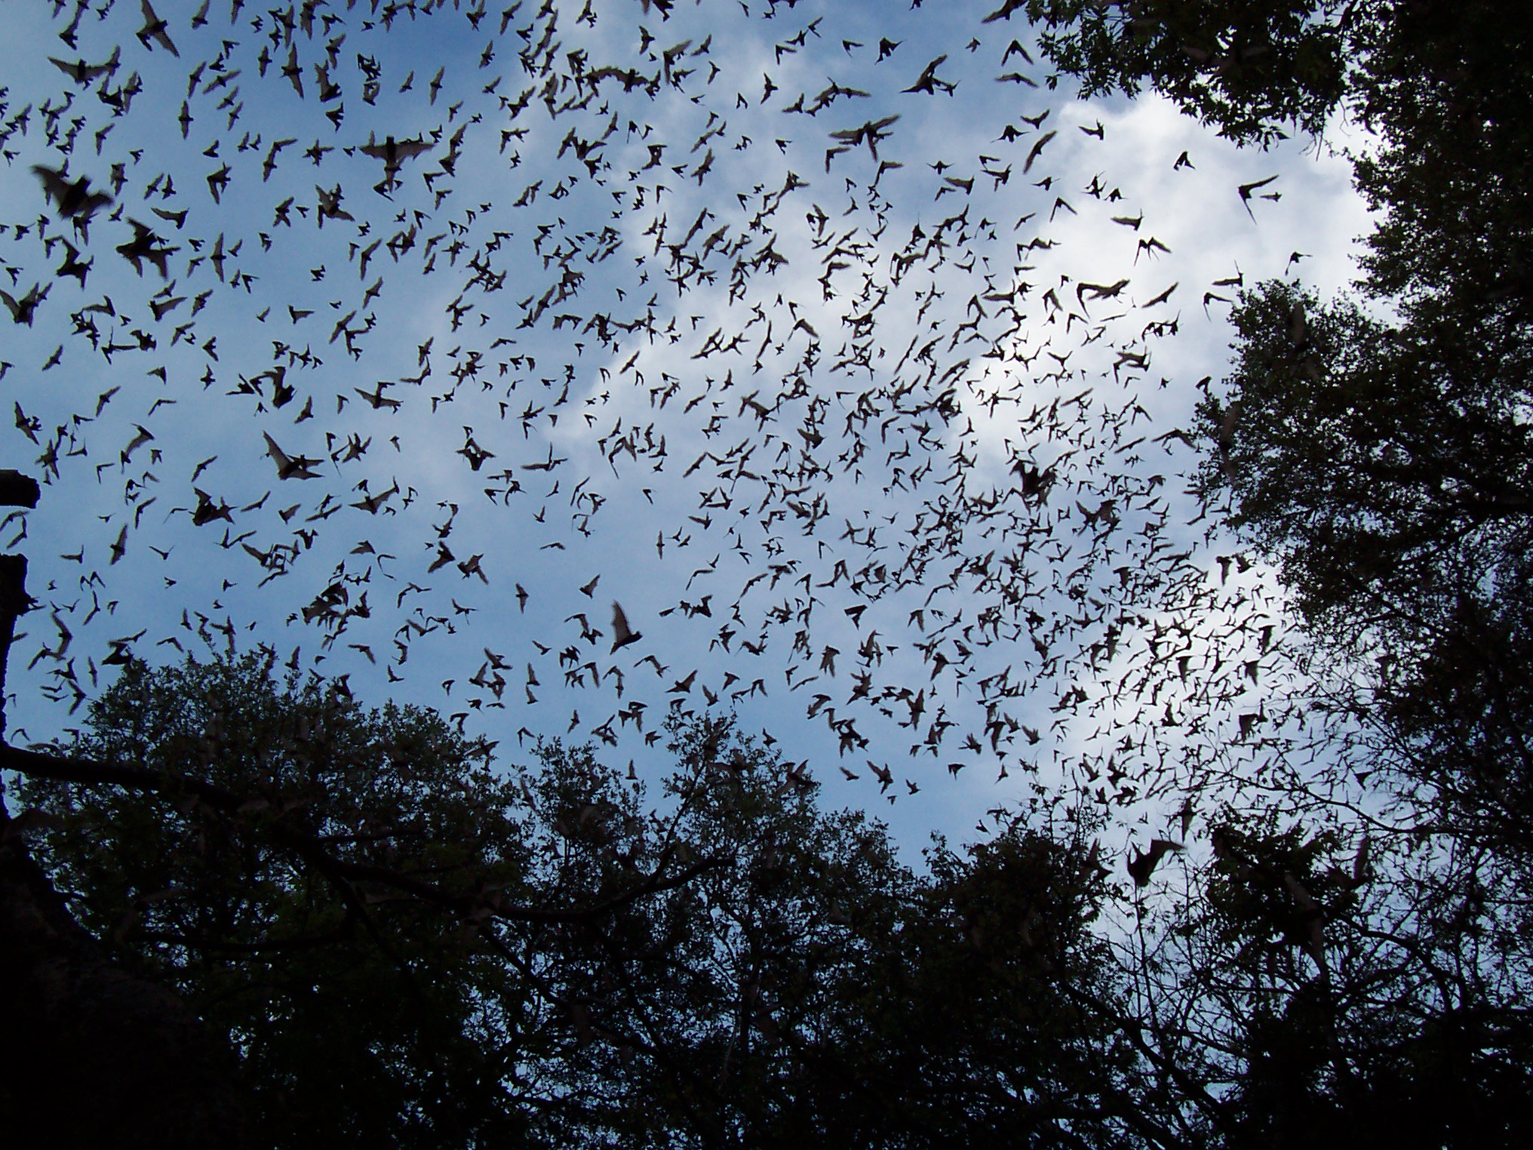 "Bats are not the danger that people think they are," say...